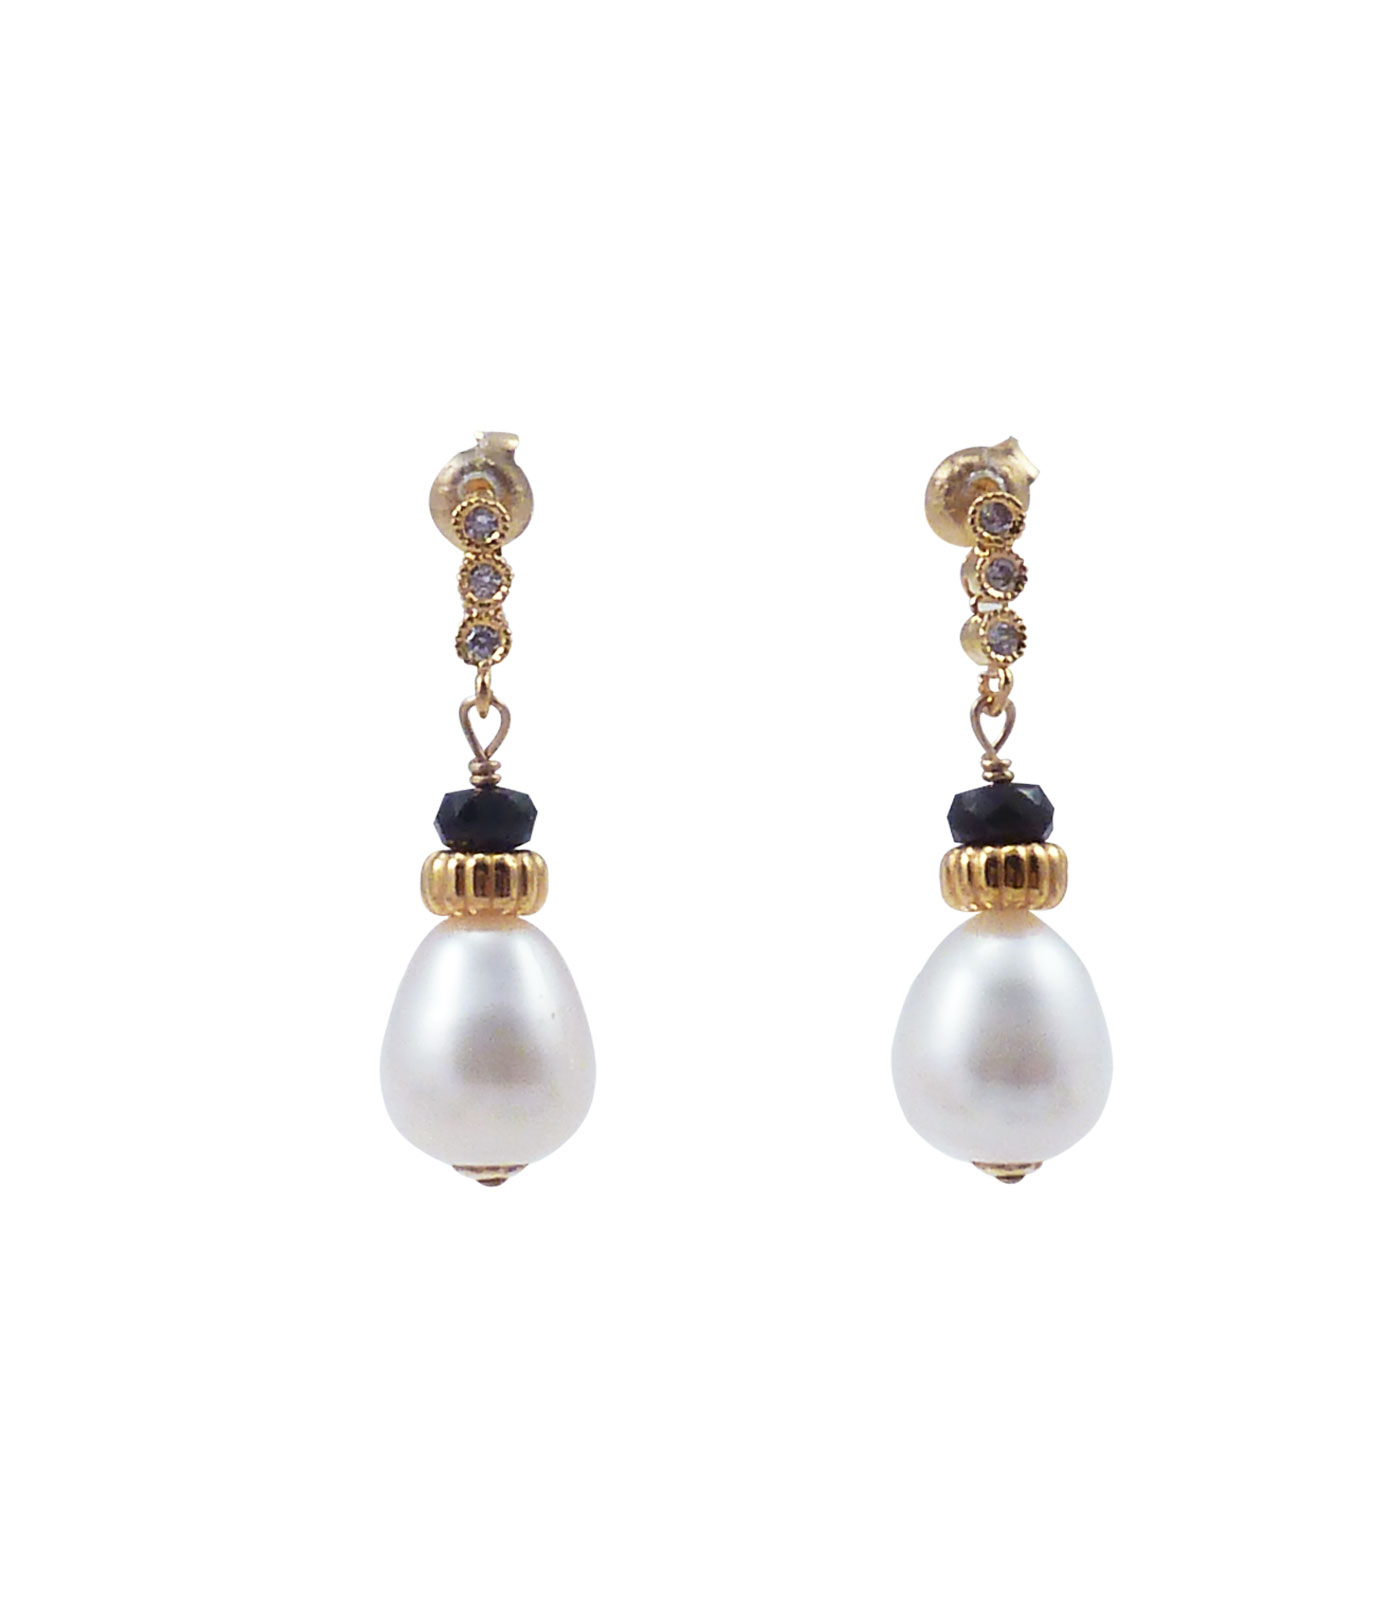 Pearl earrings black spinel as accent. White pearl jewelry